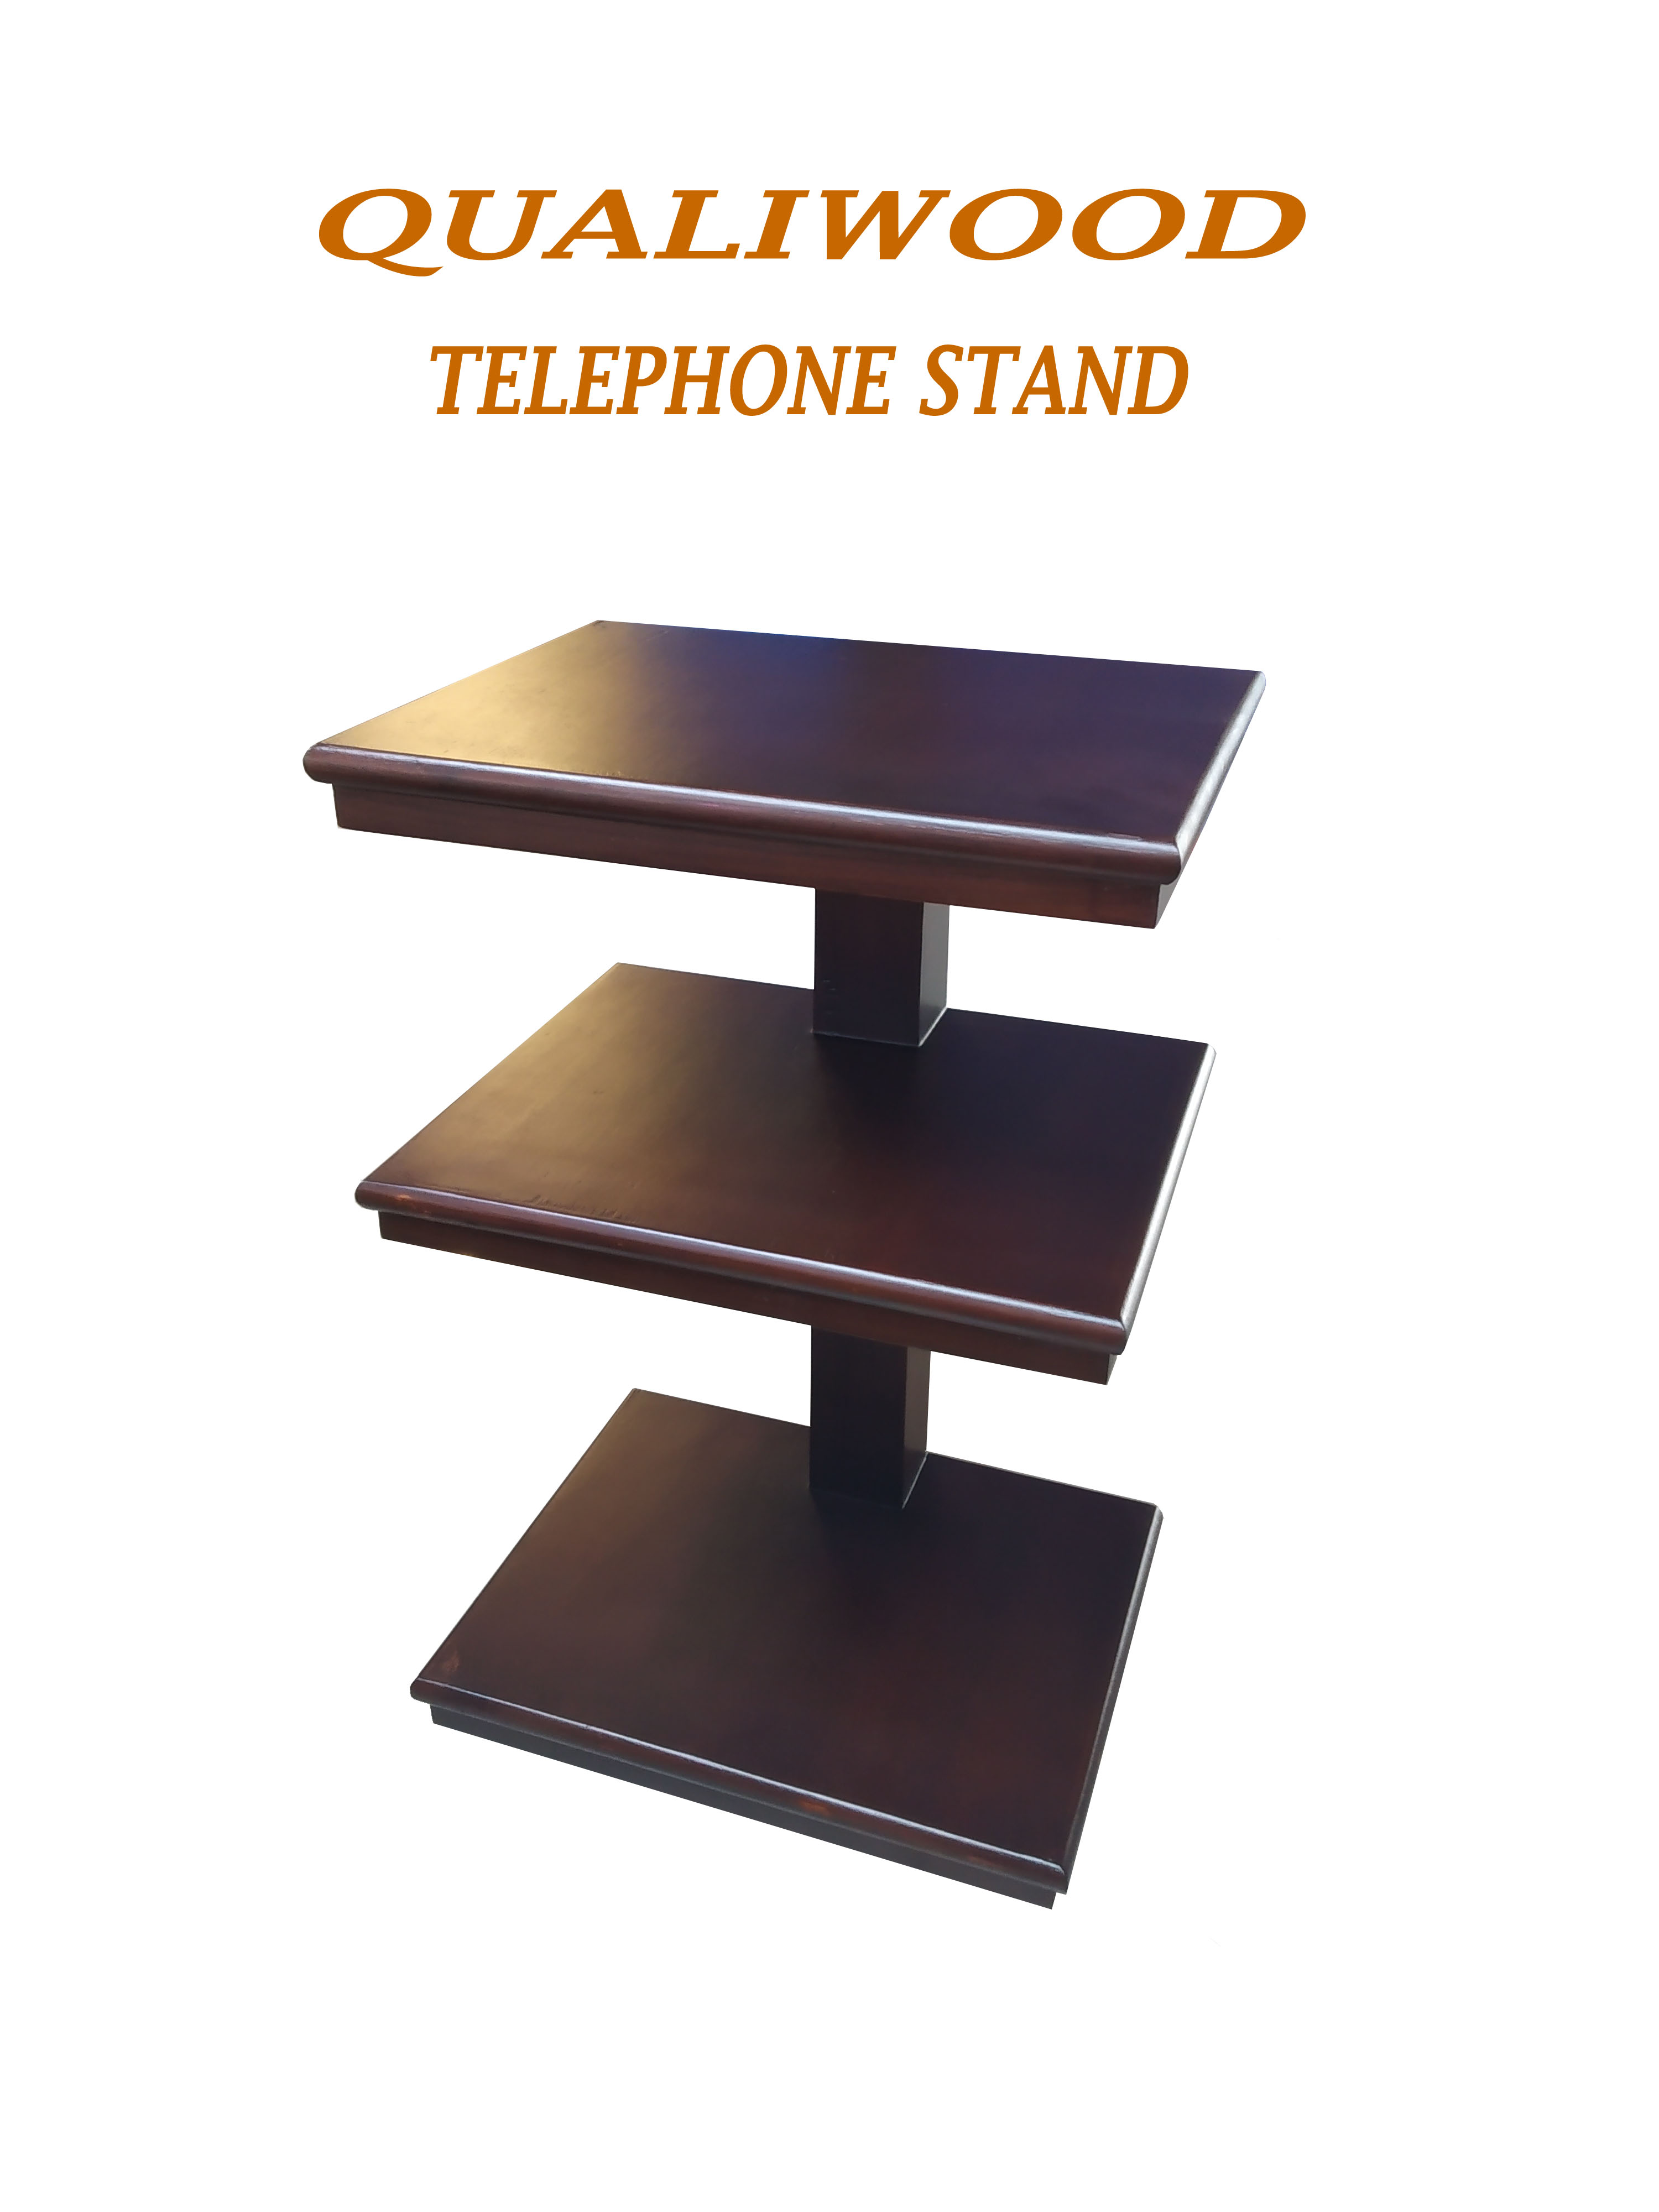 Telephone stand A